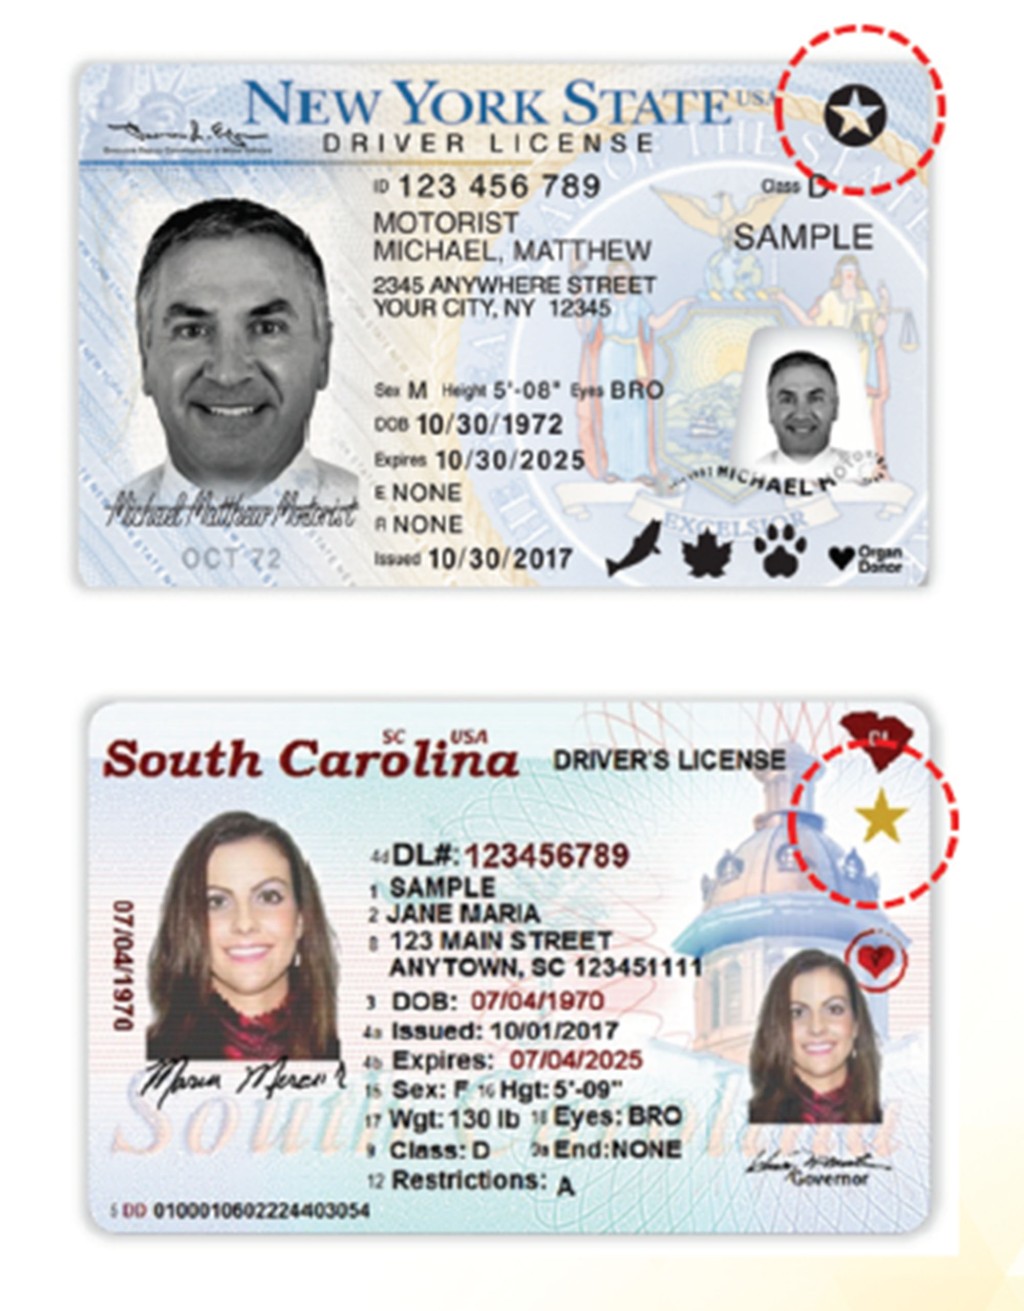 You have 1 year to get a Real ID or you can